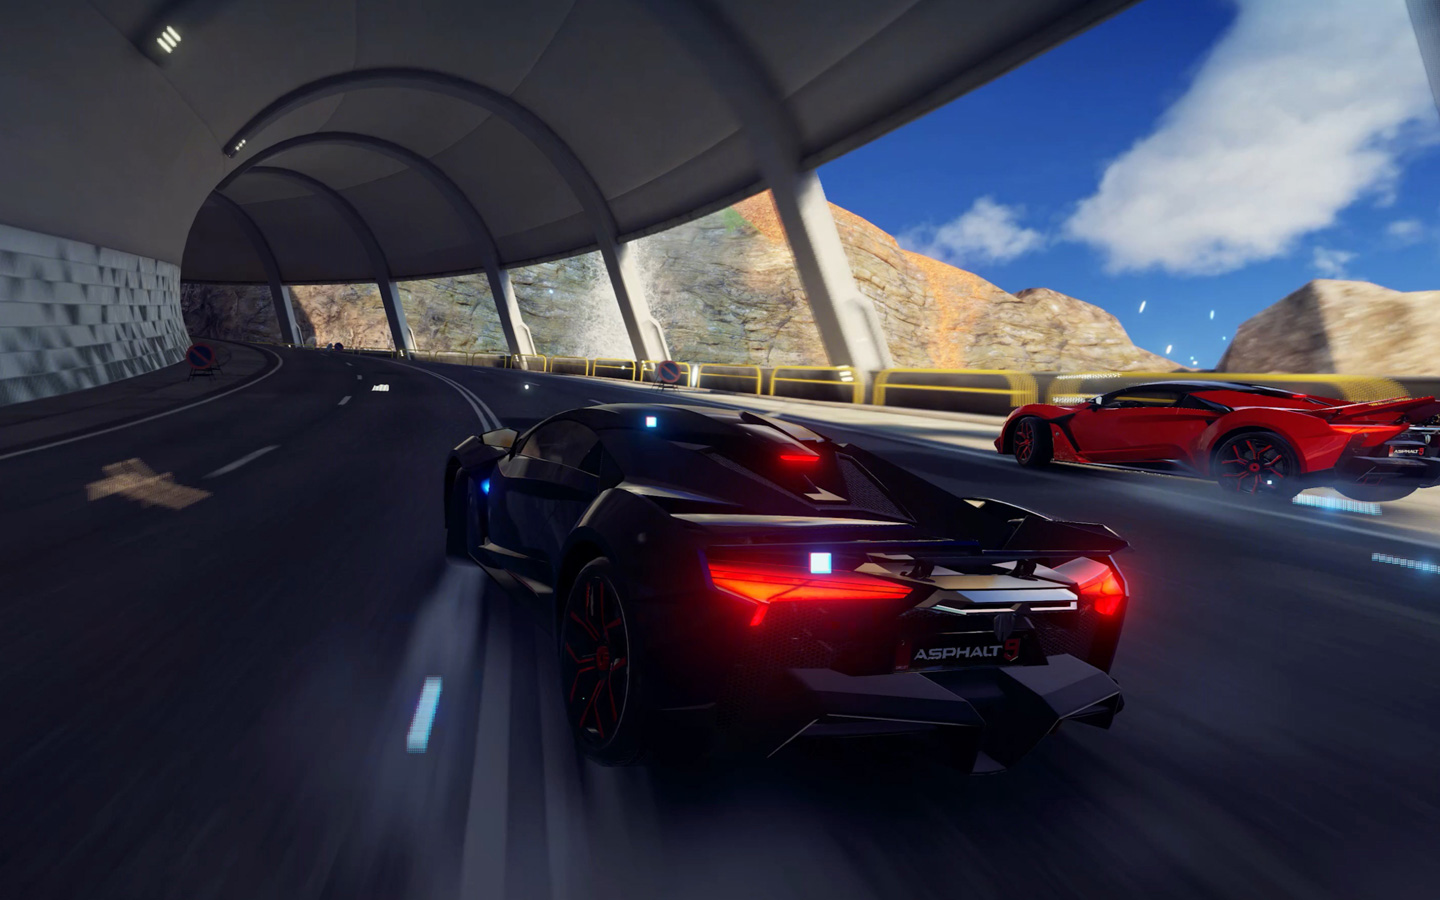 A video of a graphically intense video game where cars are racing through a tunnel.